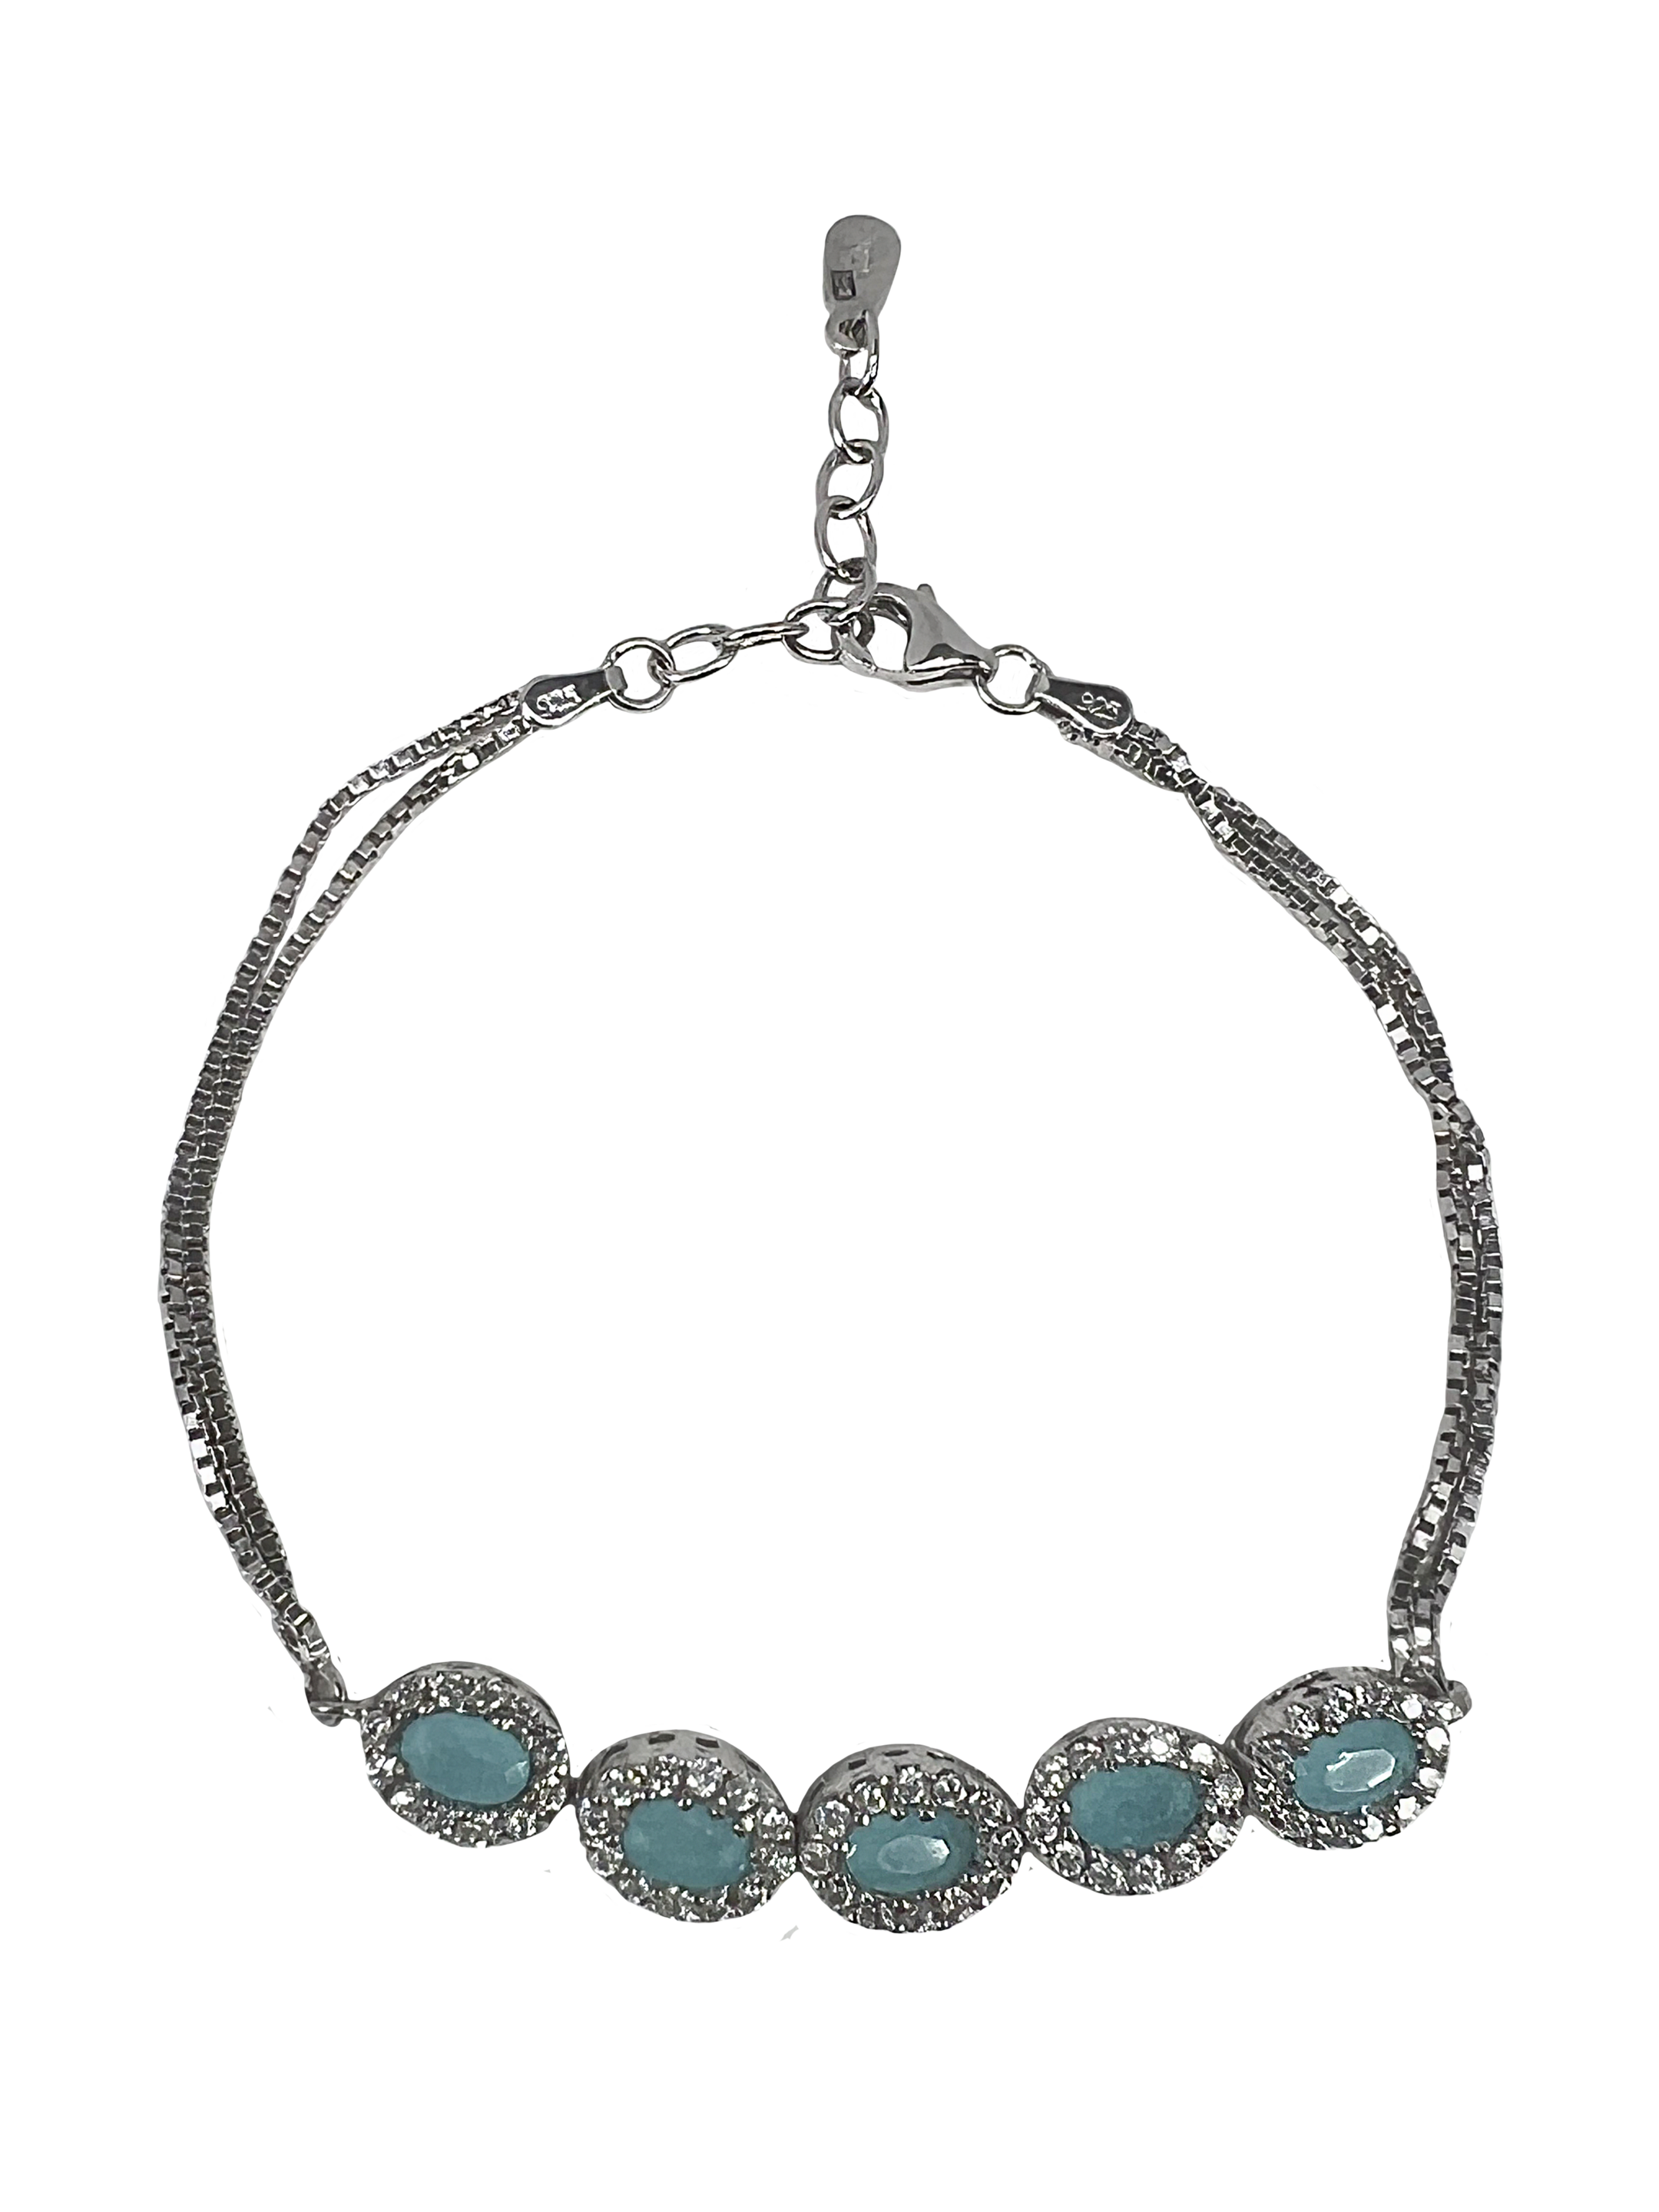 Silver bracelet with turquoise stones and crystals